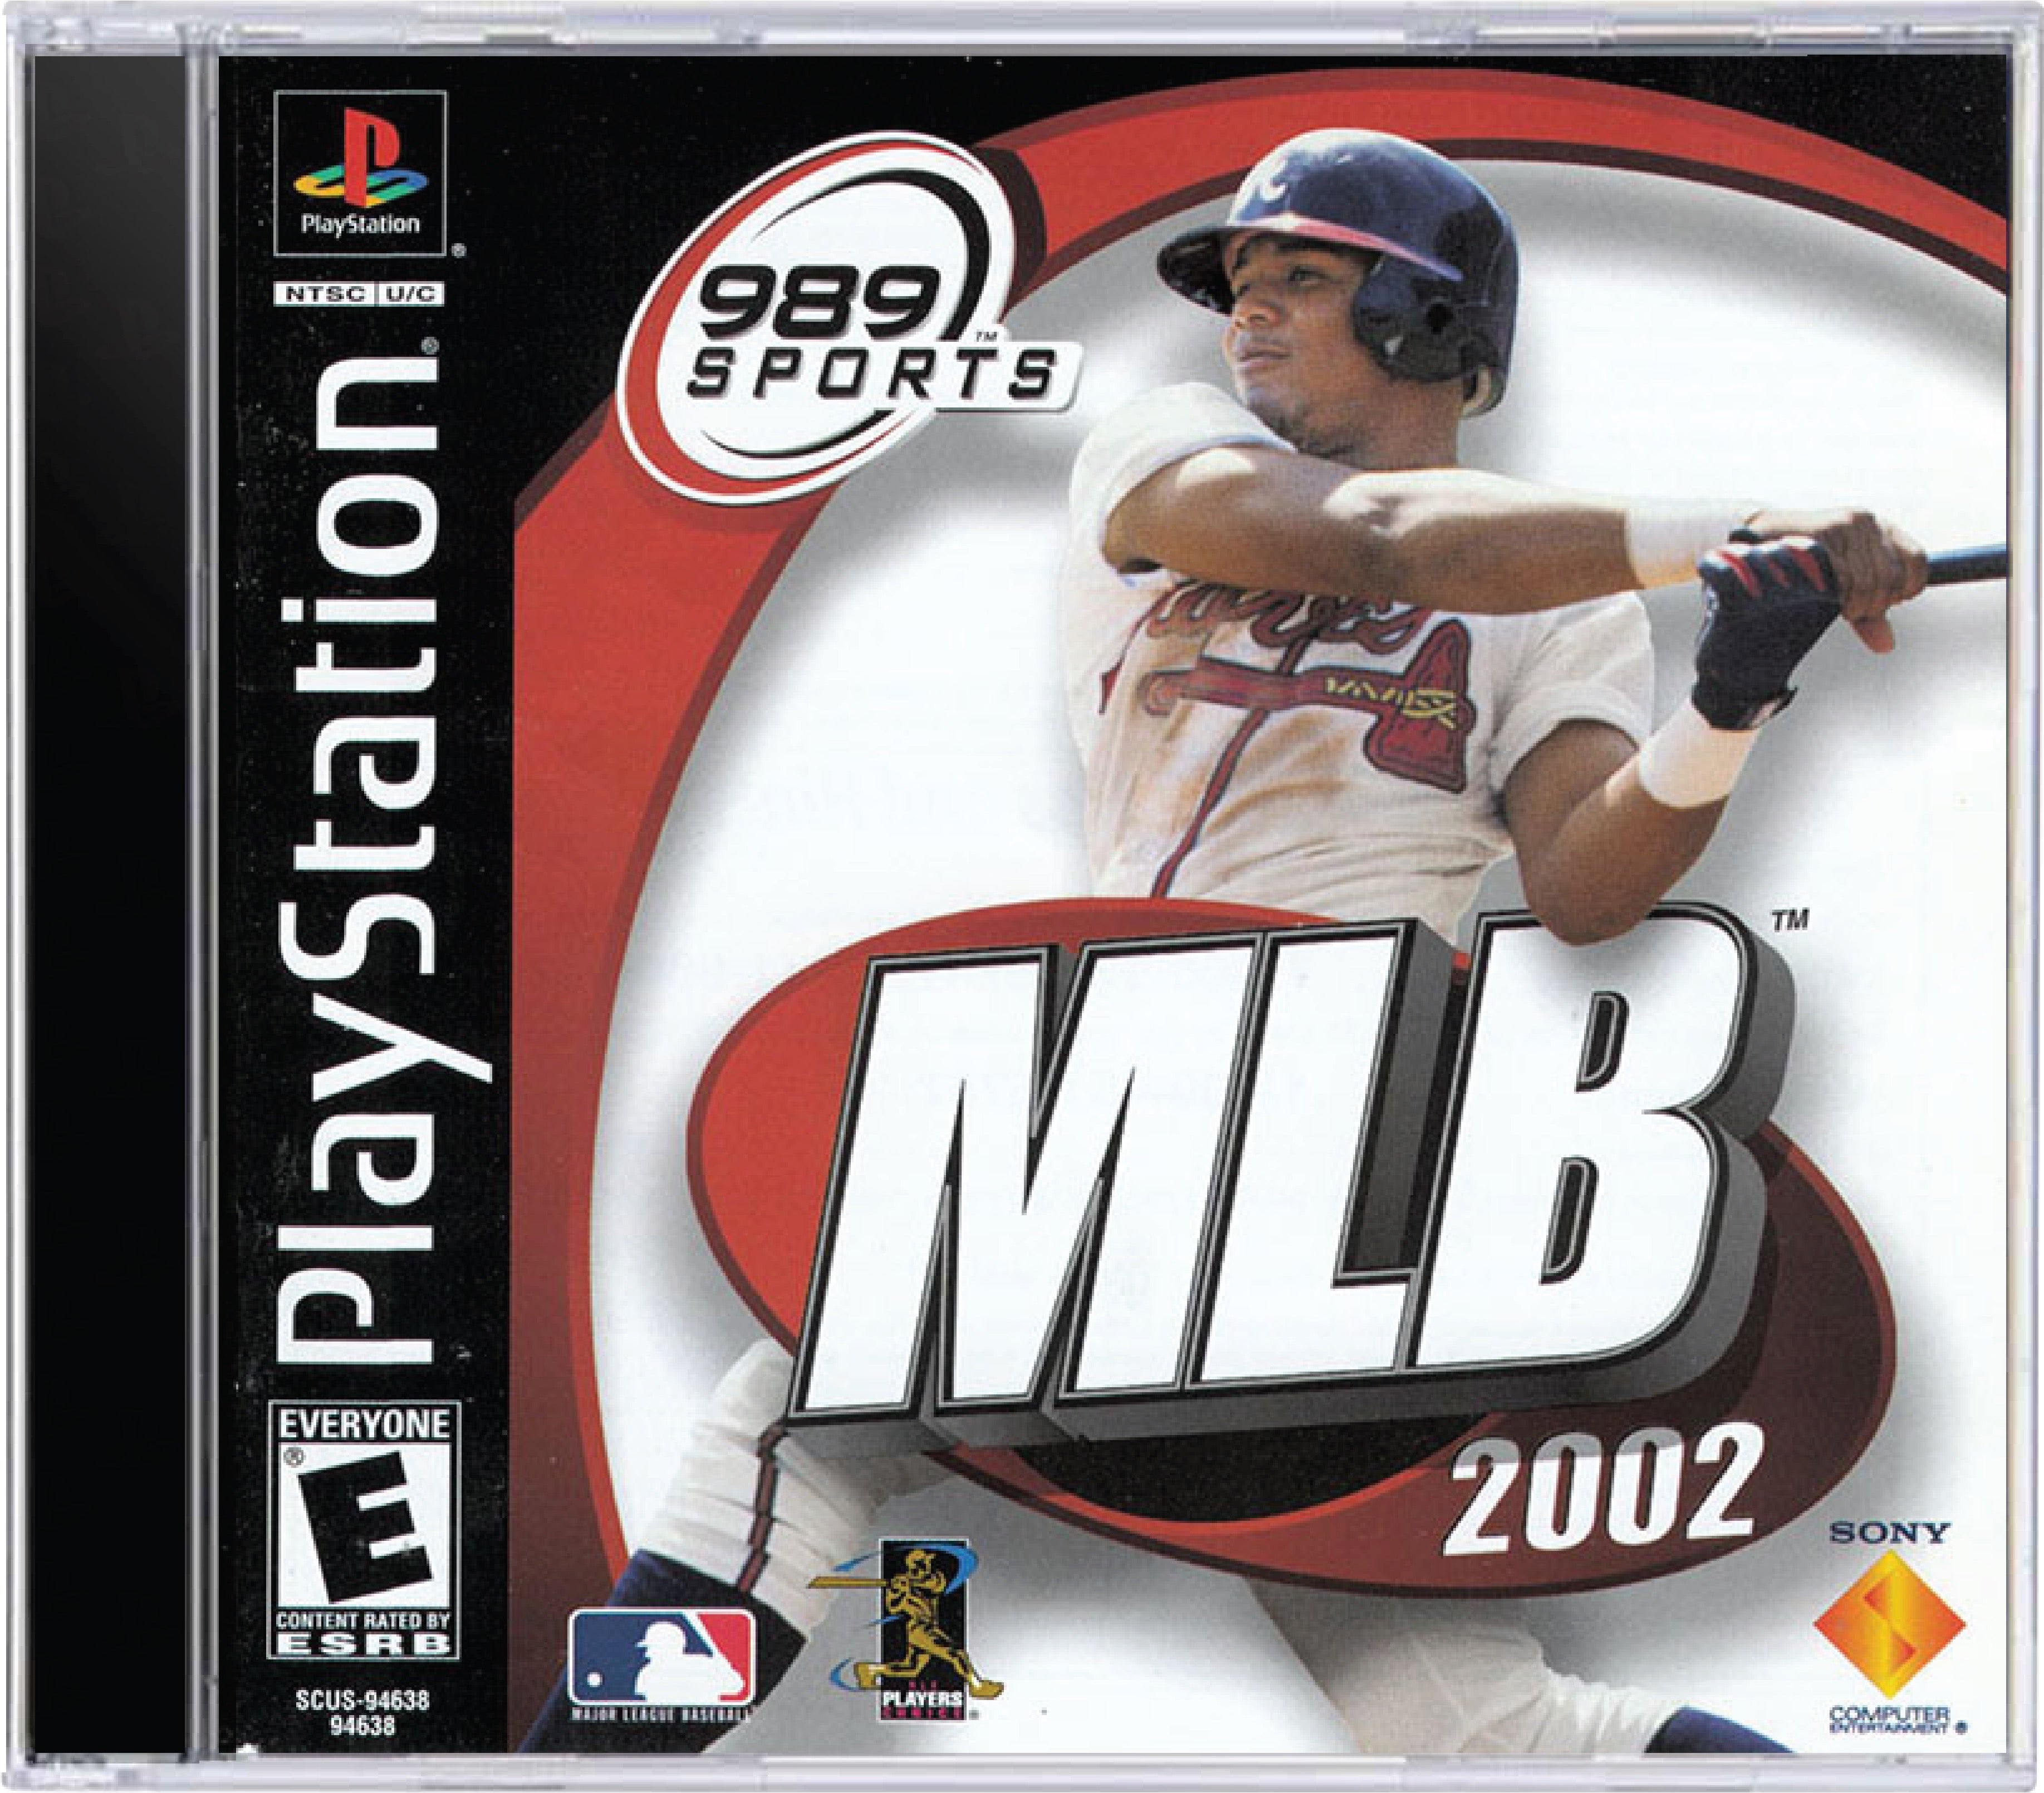 MLB 2002 Cover Art and Product Photo